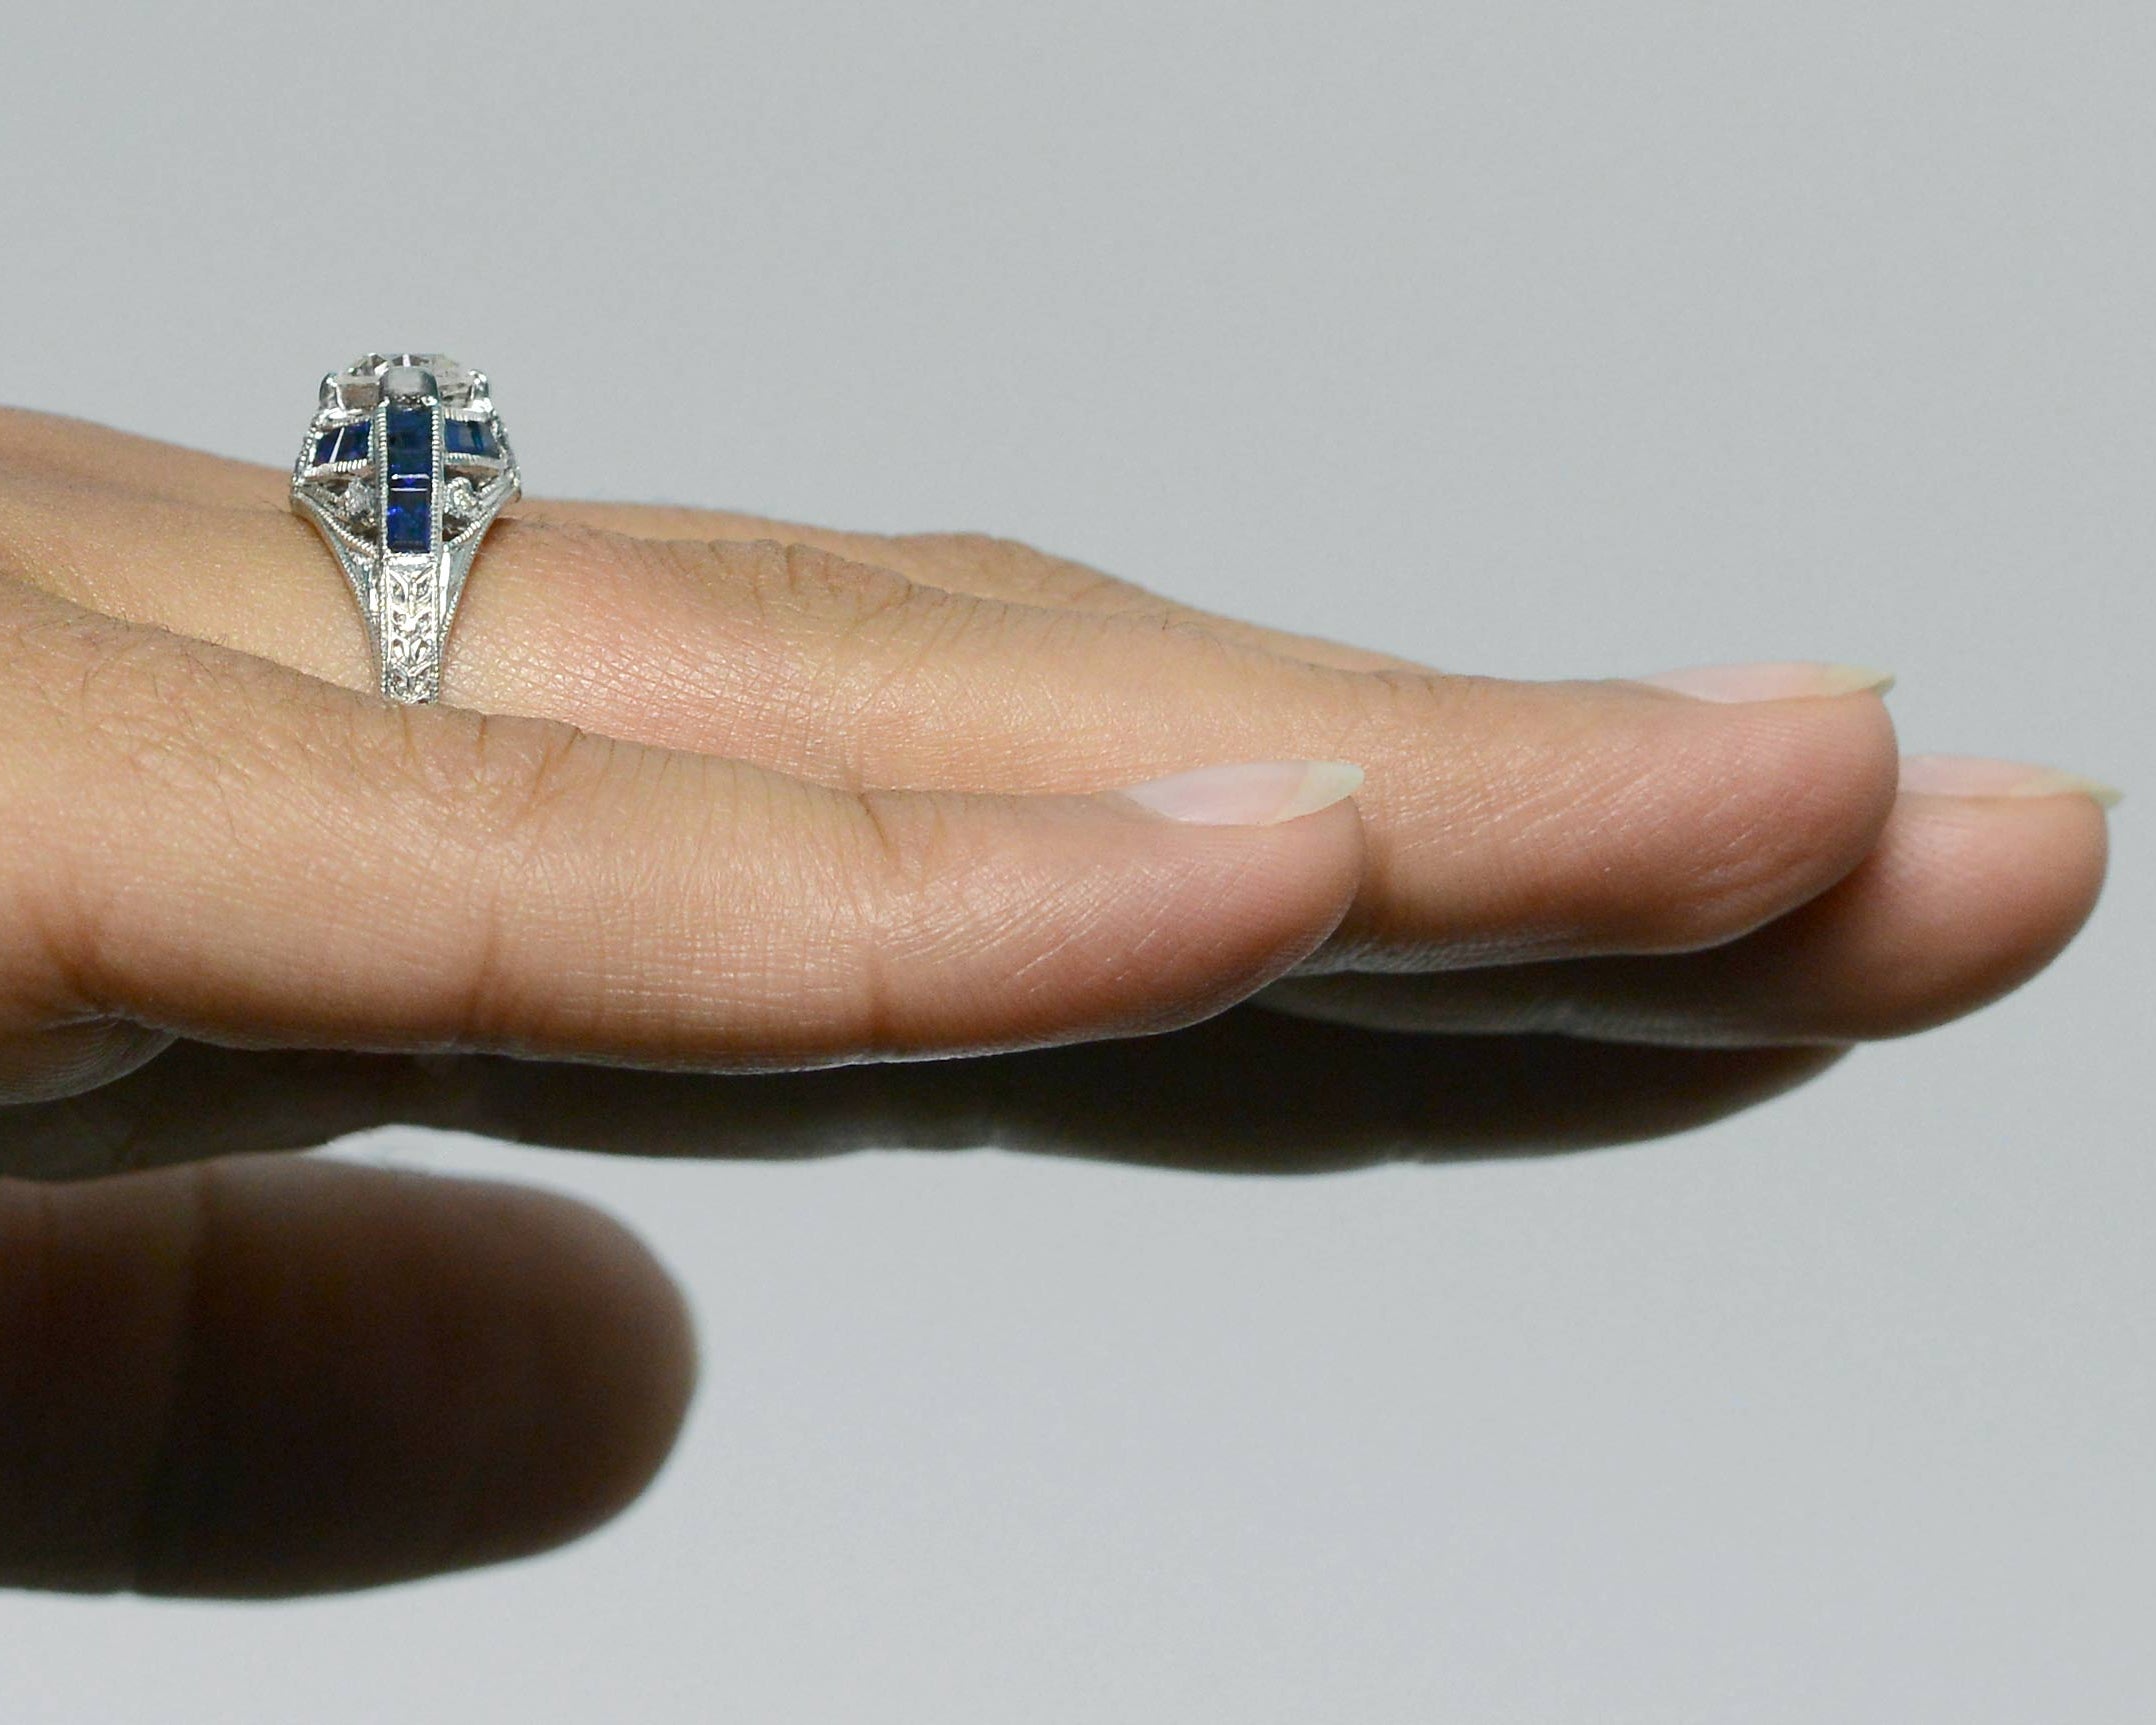 There is a blue sapphire cross pattern in this diamond Art Deco engagement ring.